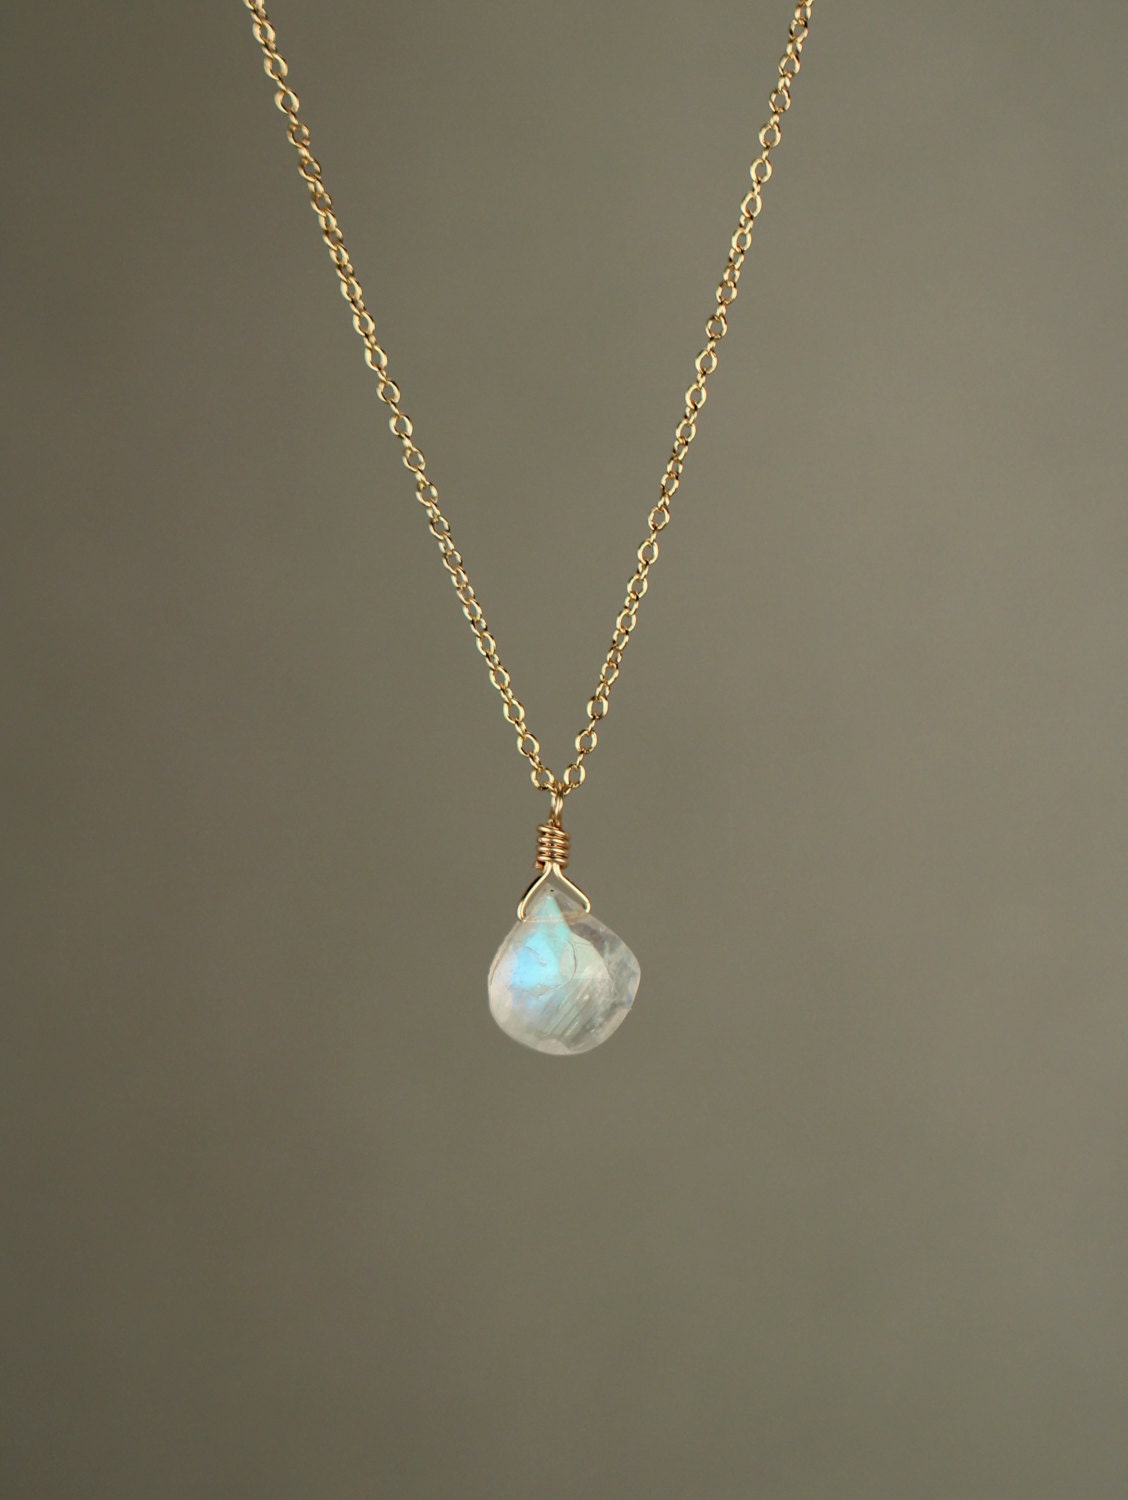 Moonstone Necklace Rainbow Moonstone Necklace Dainty Crystal Necklace